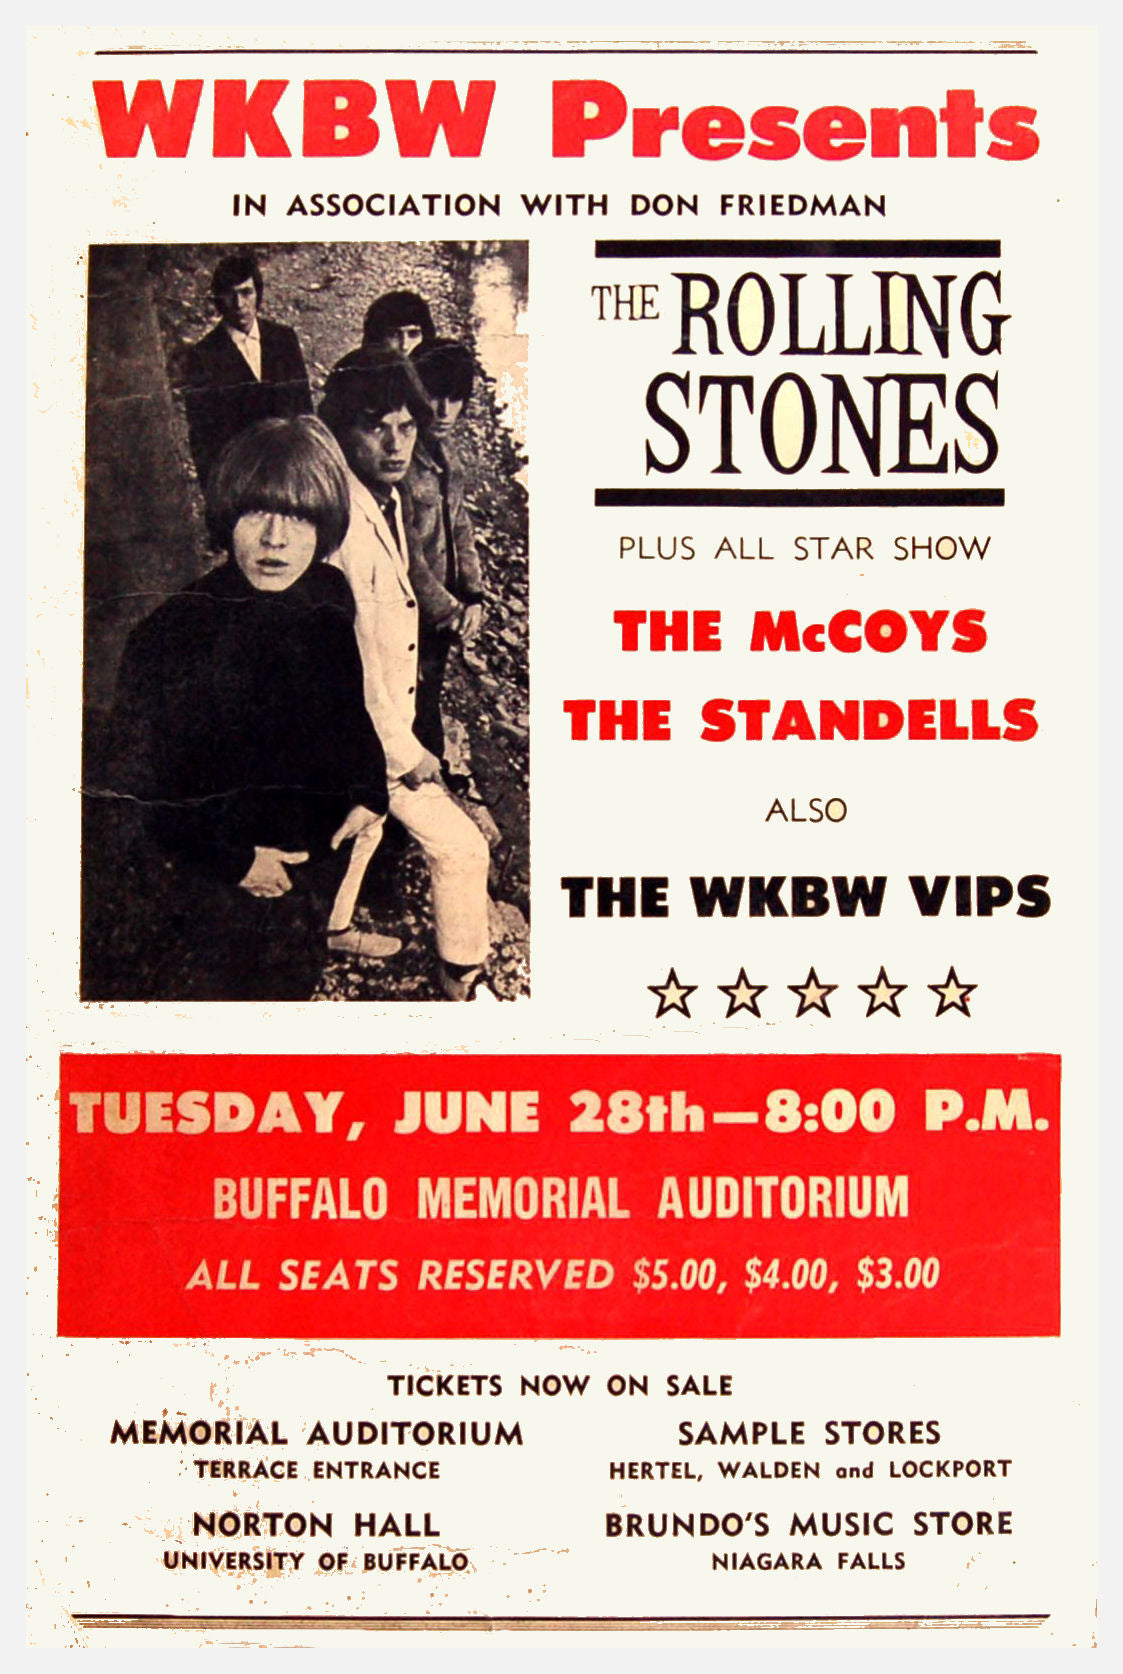 The Rolling Stones at the Buffalo Memorial Auditorium concert poster